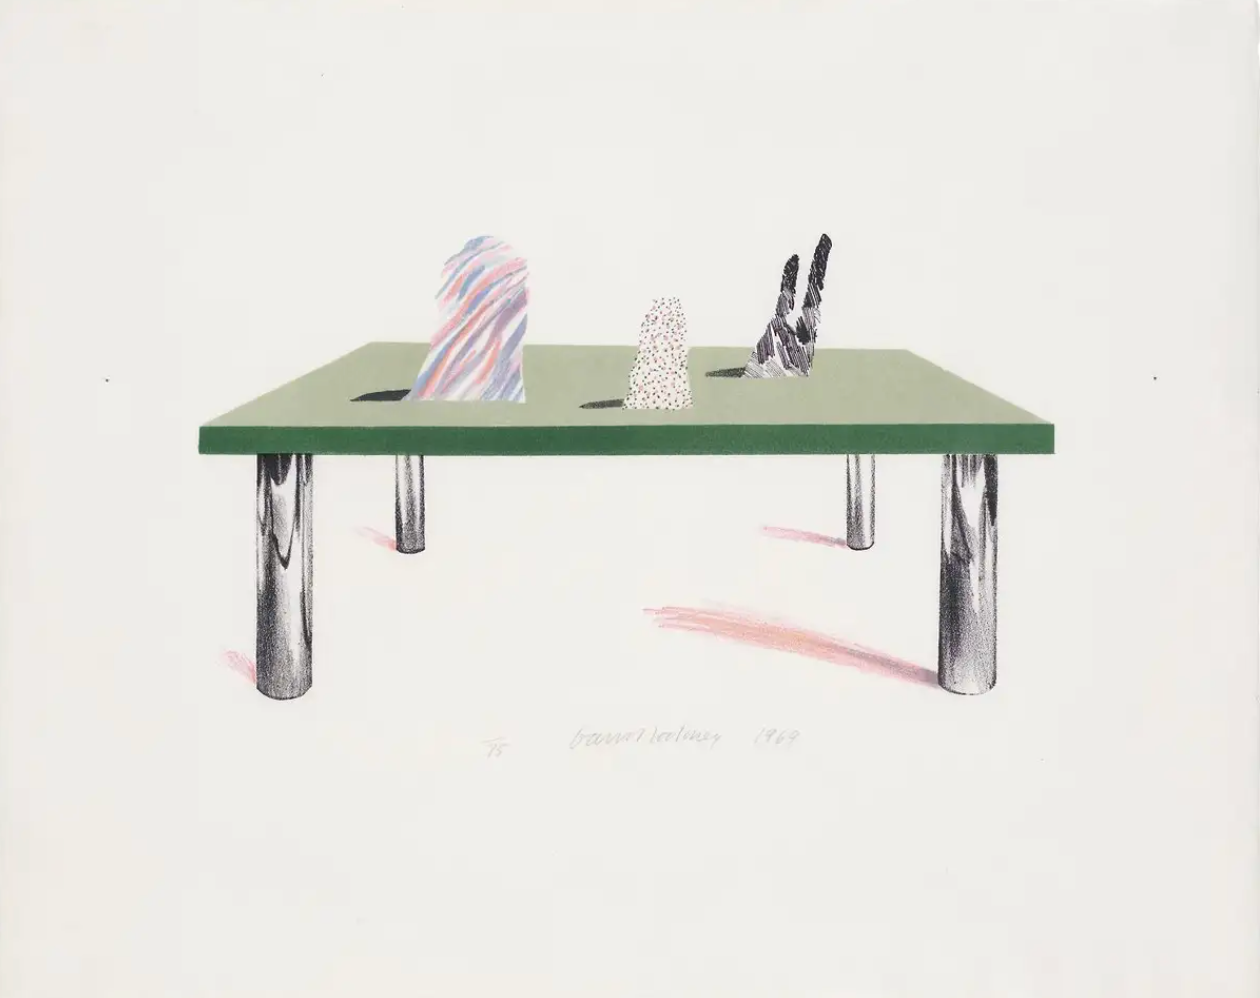 David Hockney, Glass Table With Objects,1969